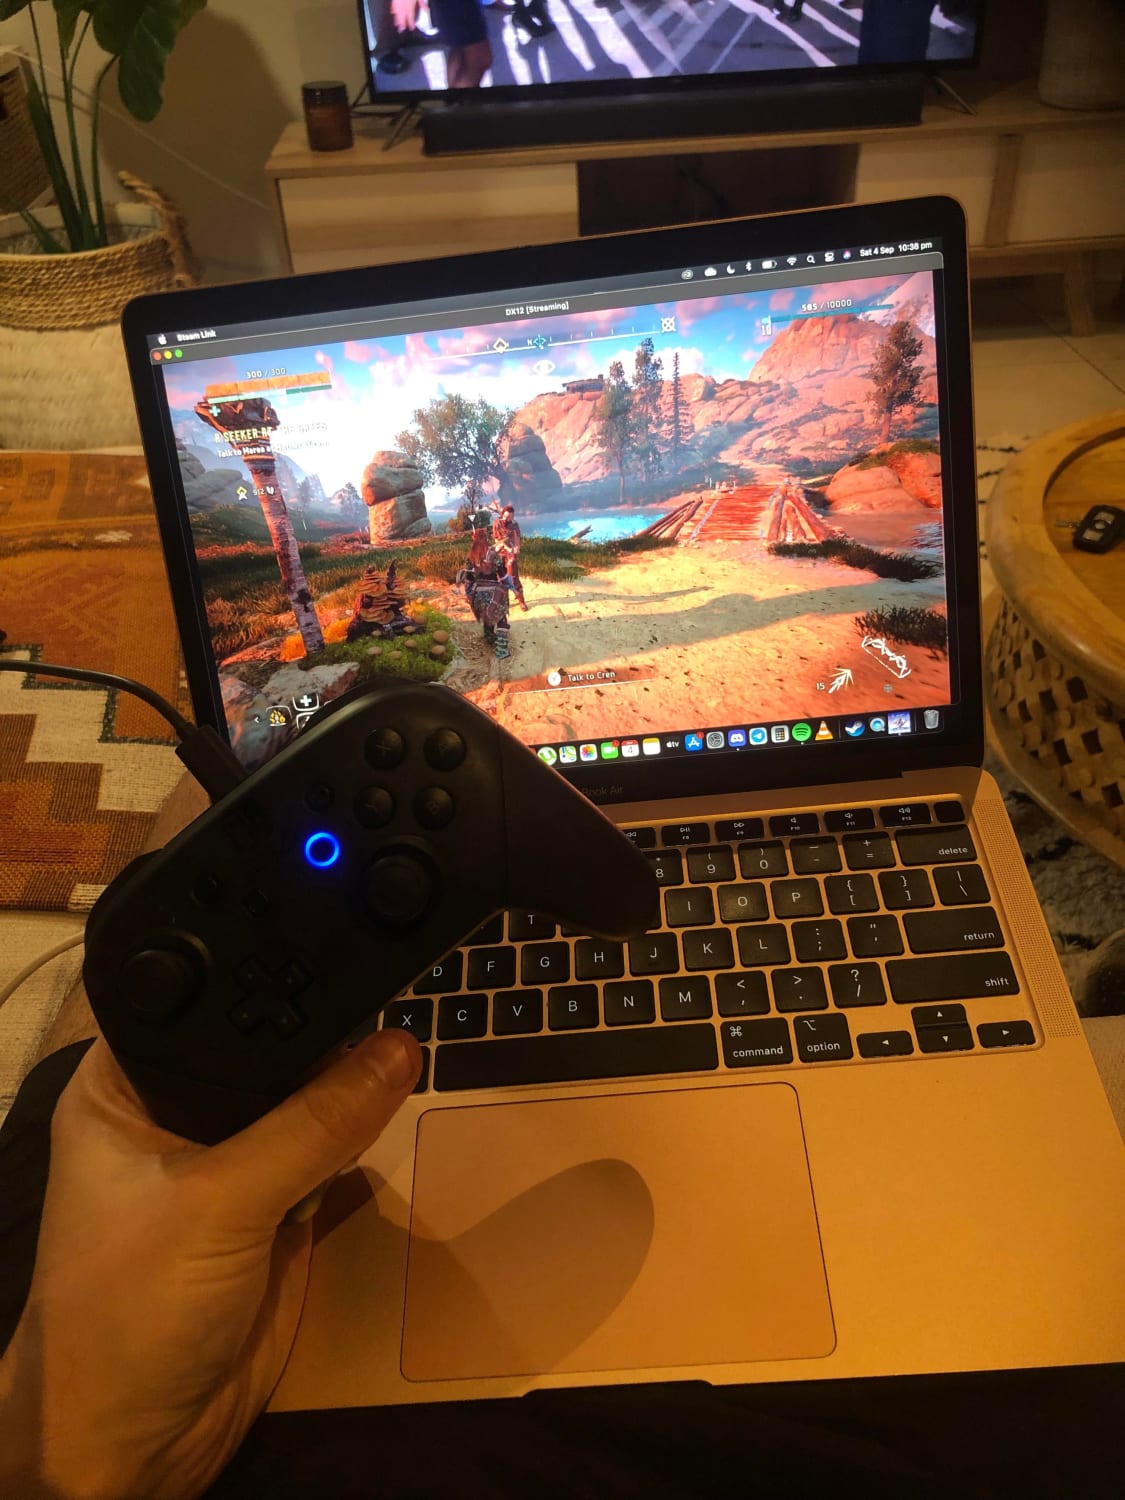 Playing a PlayStation game (HZD) on an Apple MacBook with a Nintendo Controller thanks to Steamlink!